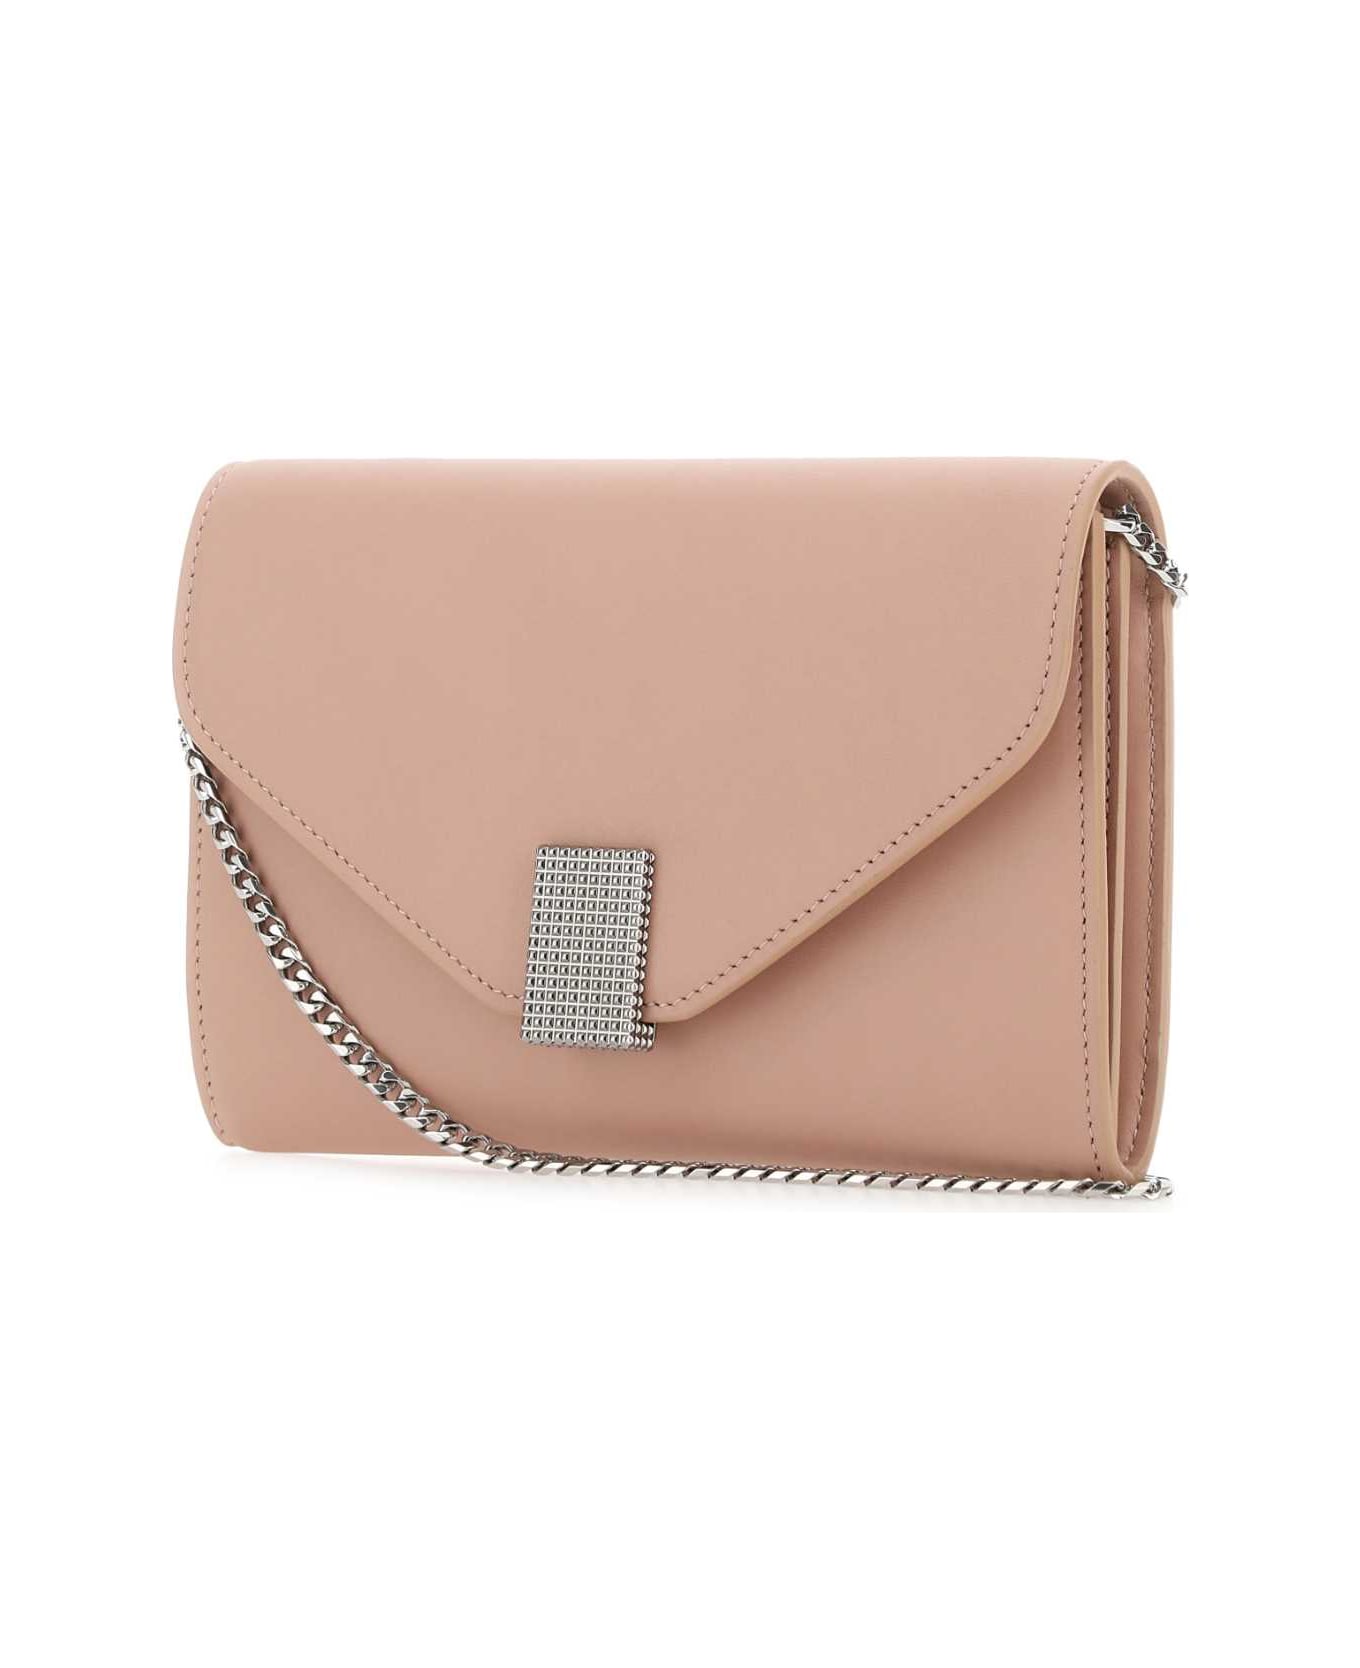 Lanvin Antiqued Pink Leather Concerto Clutch - Pink クラッチバッグ